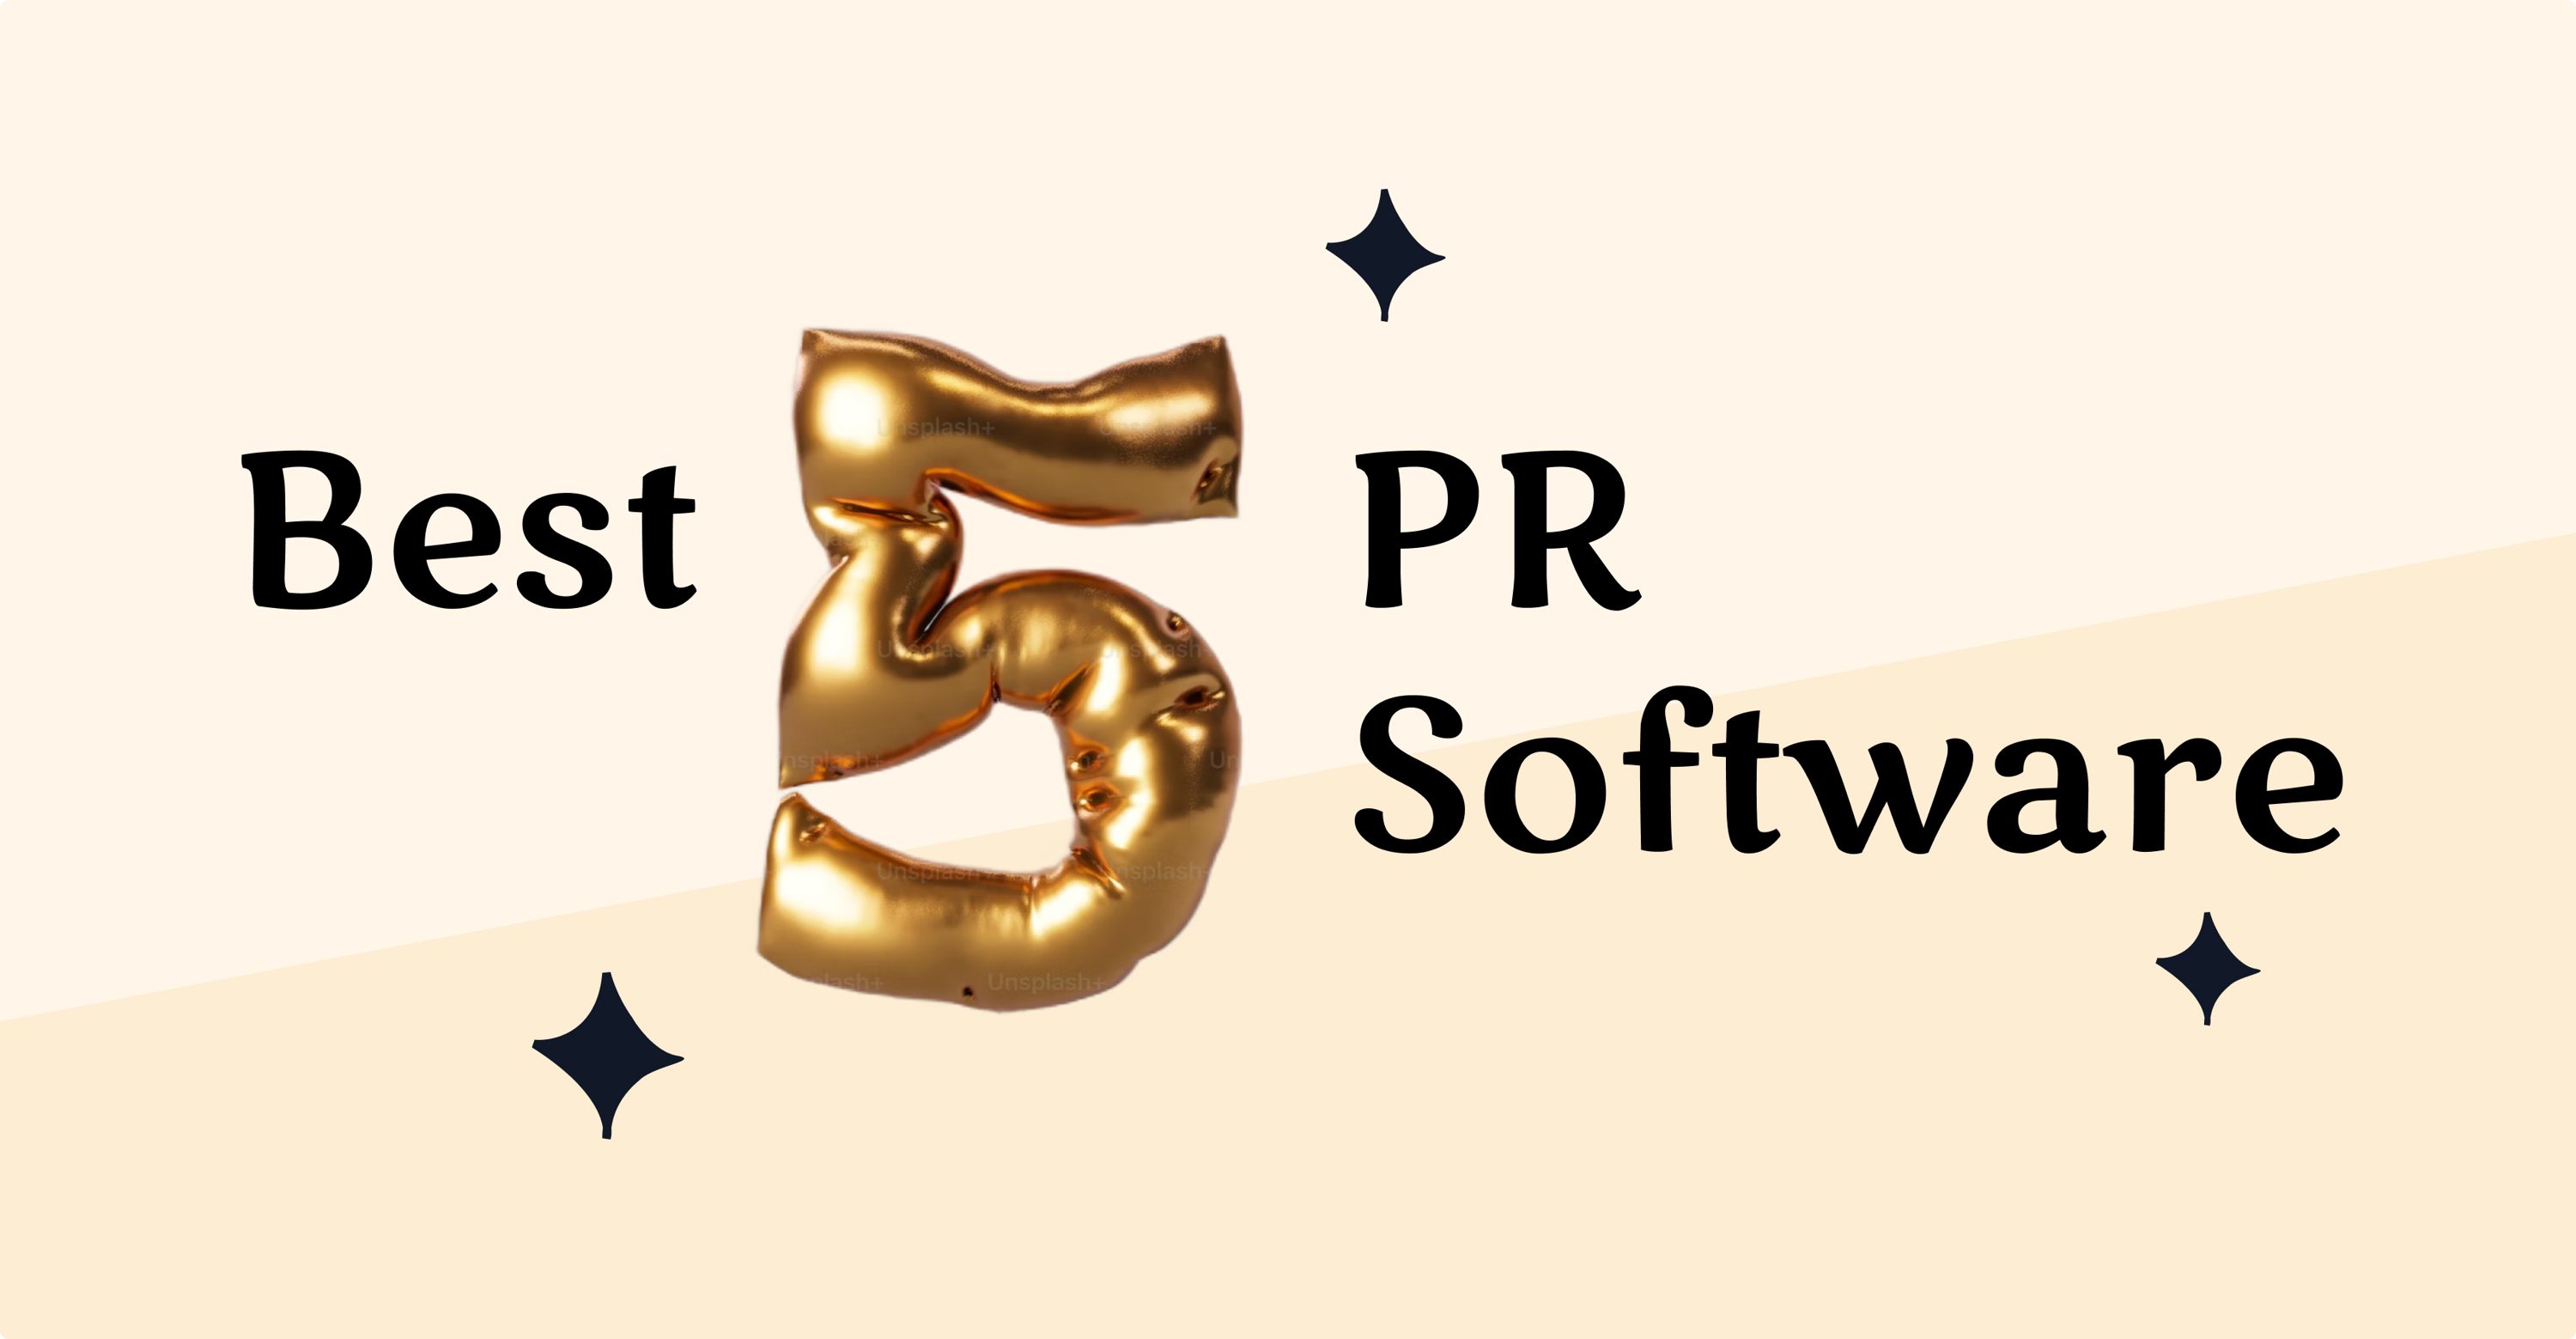 Academy: The 5 best public relations & management software tools in 2023